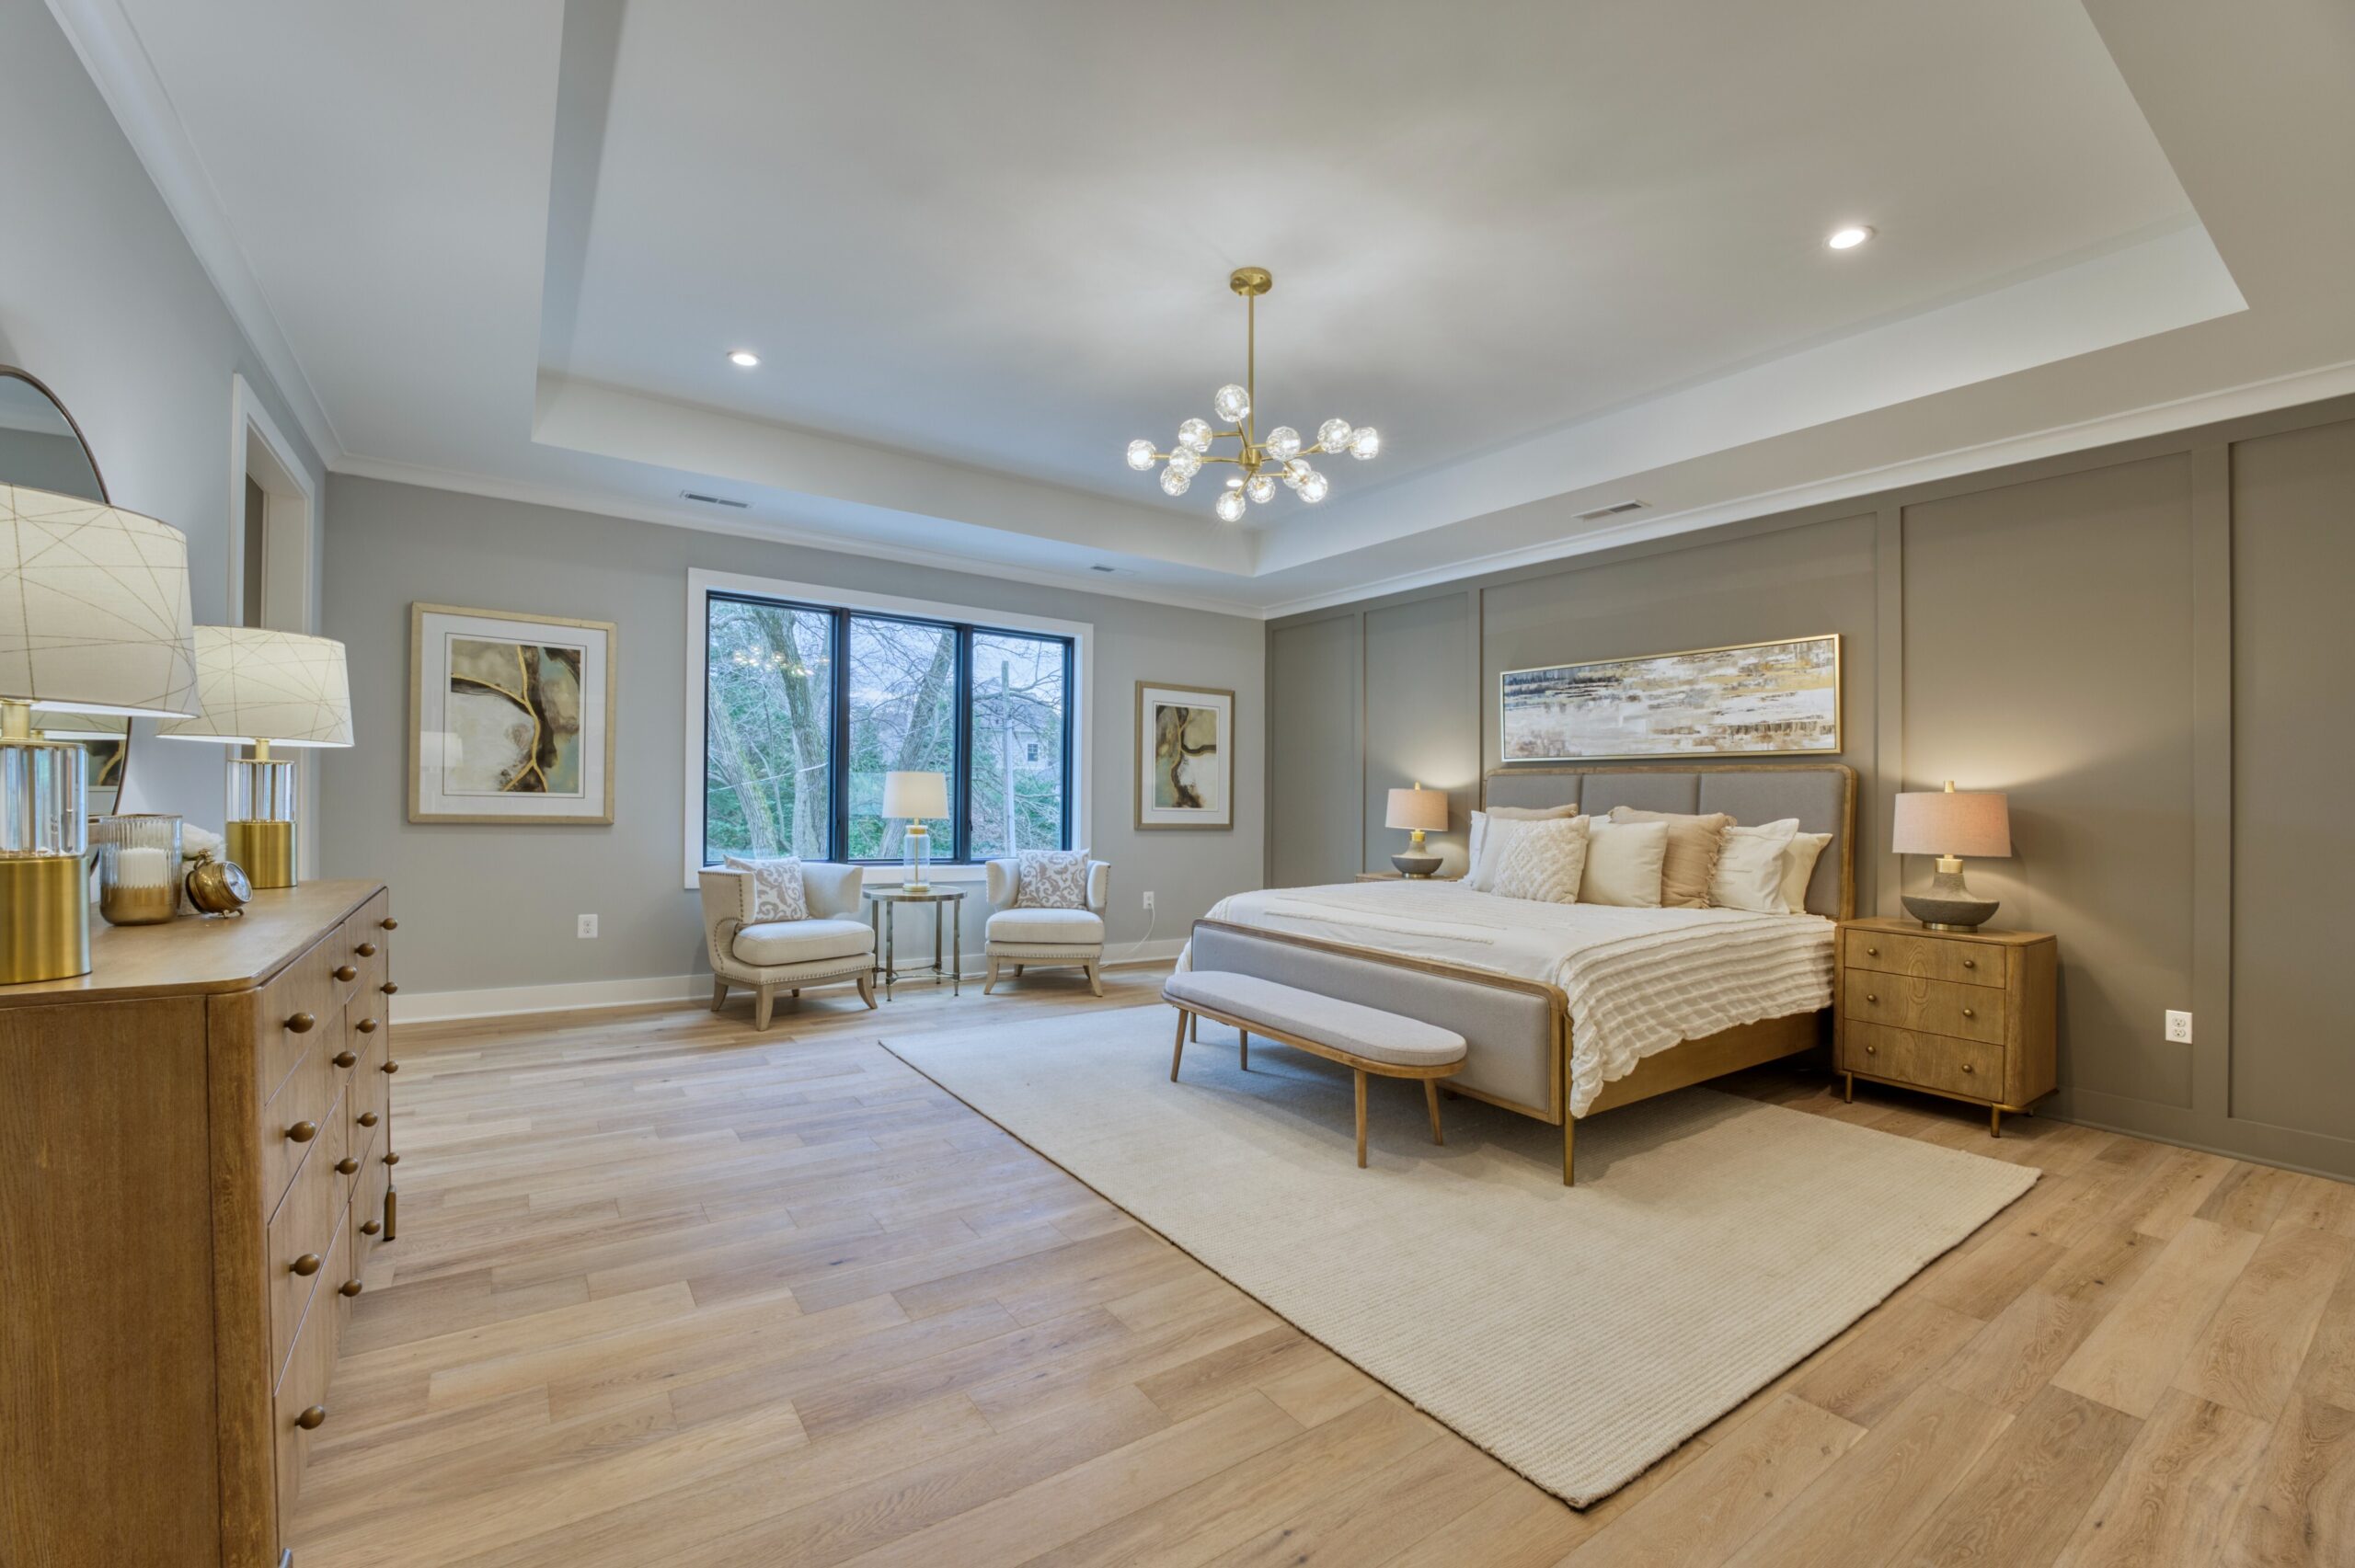 Professional interior photo of new construction home at 3400 N Ohio St - showing the primary bedroom with tray ceiling, grey accent wall, and hardwood floors